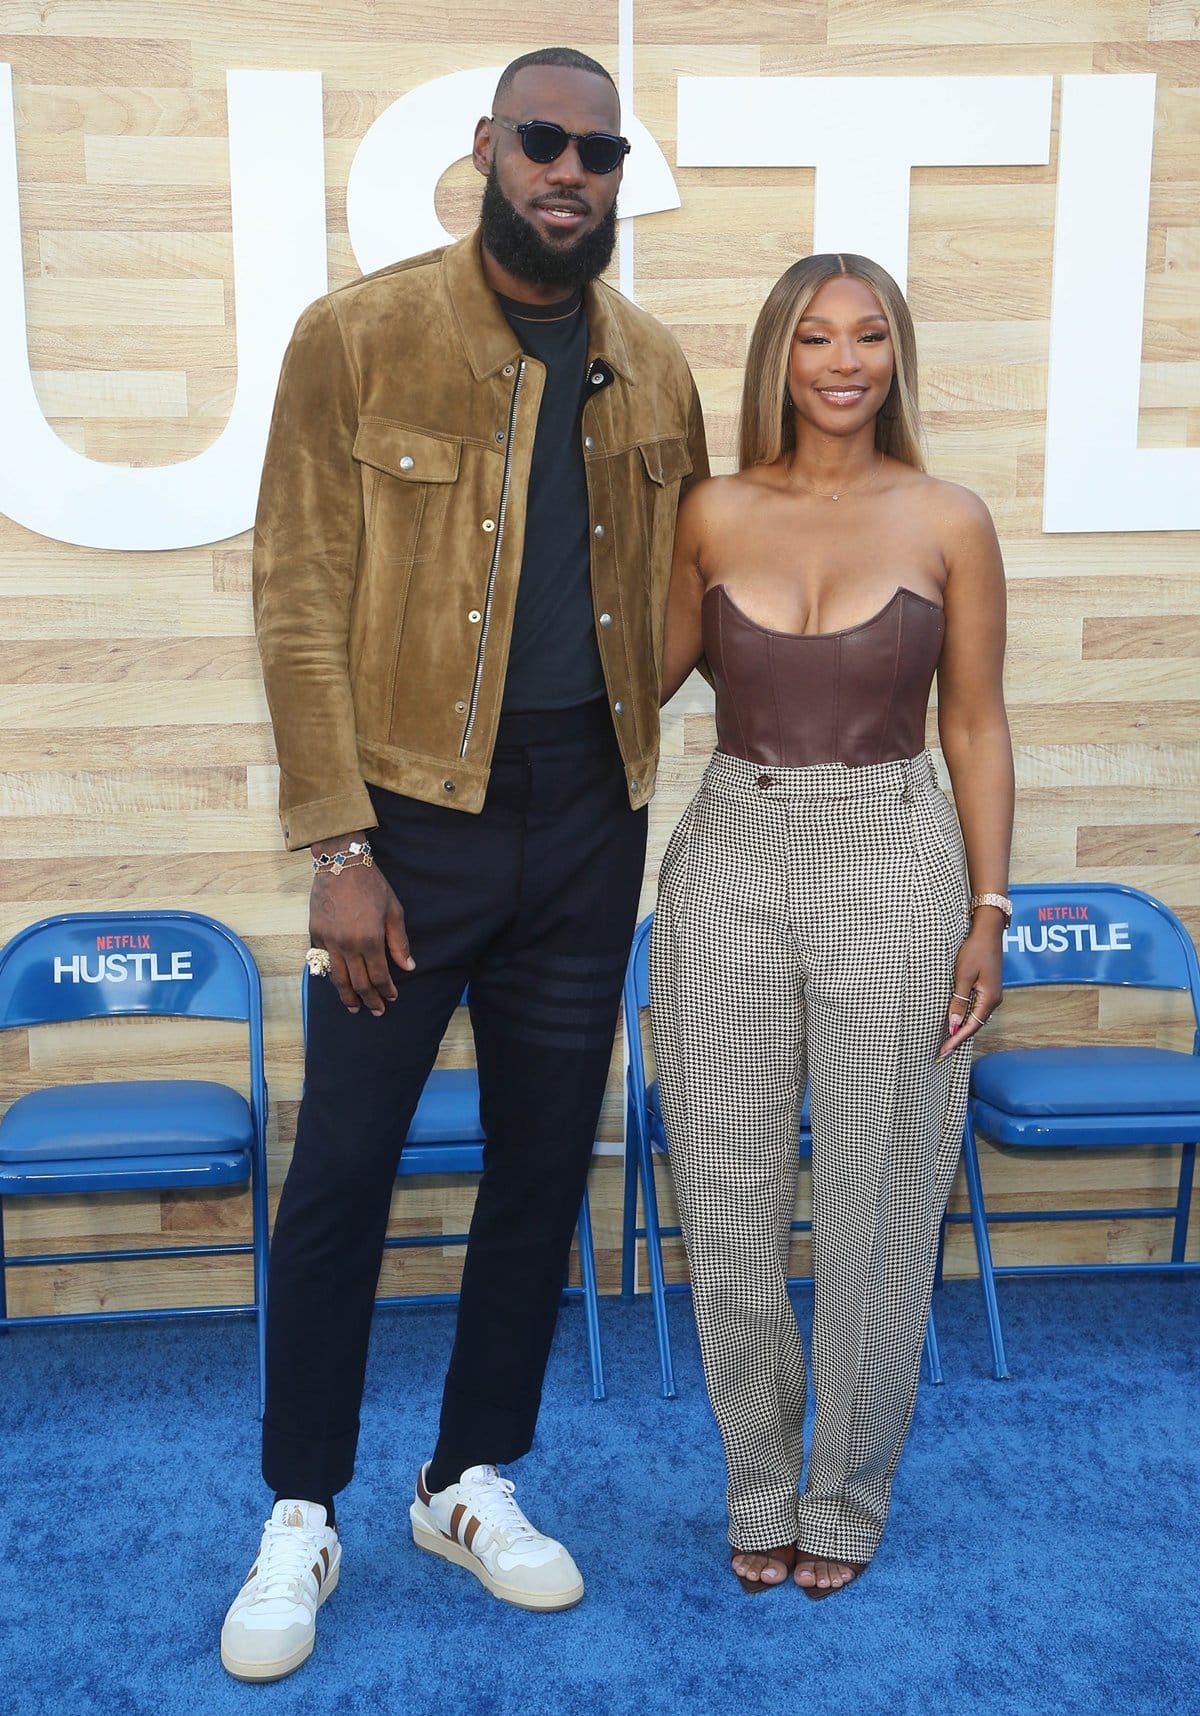 LeBron James and his wife Savannah James attend the Netflix World Premiere of "Hustle"